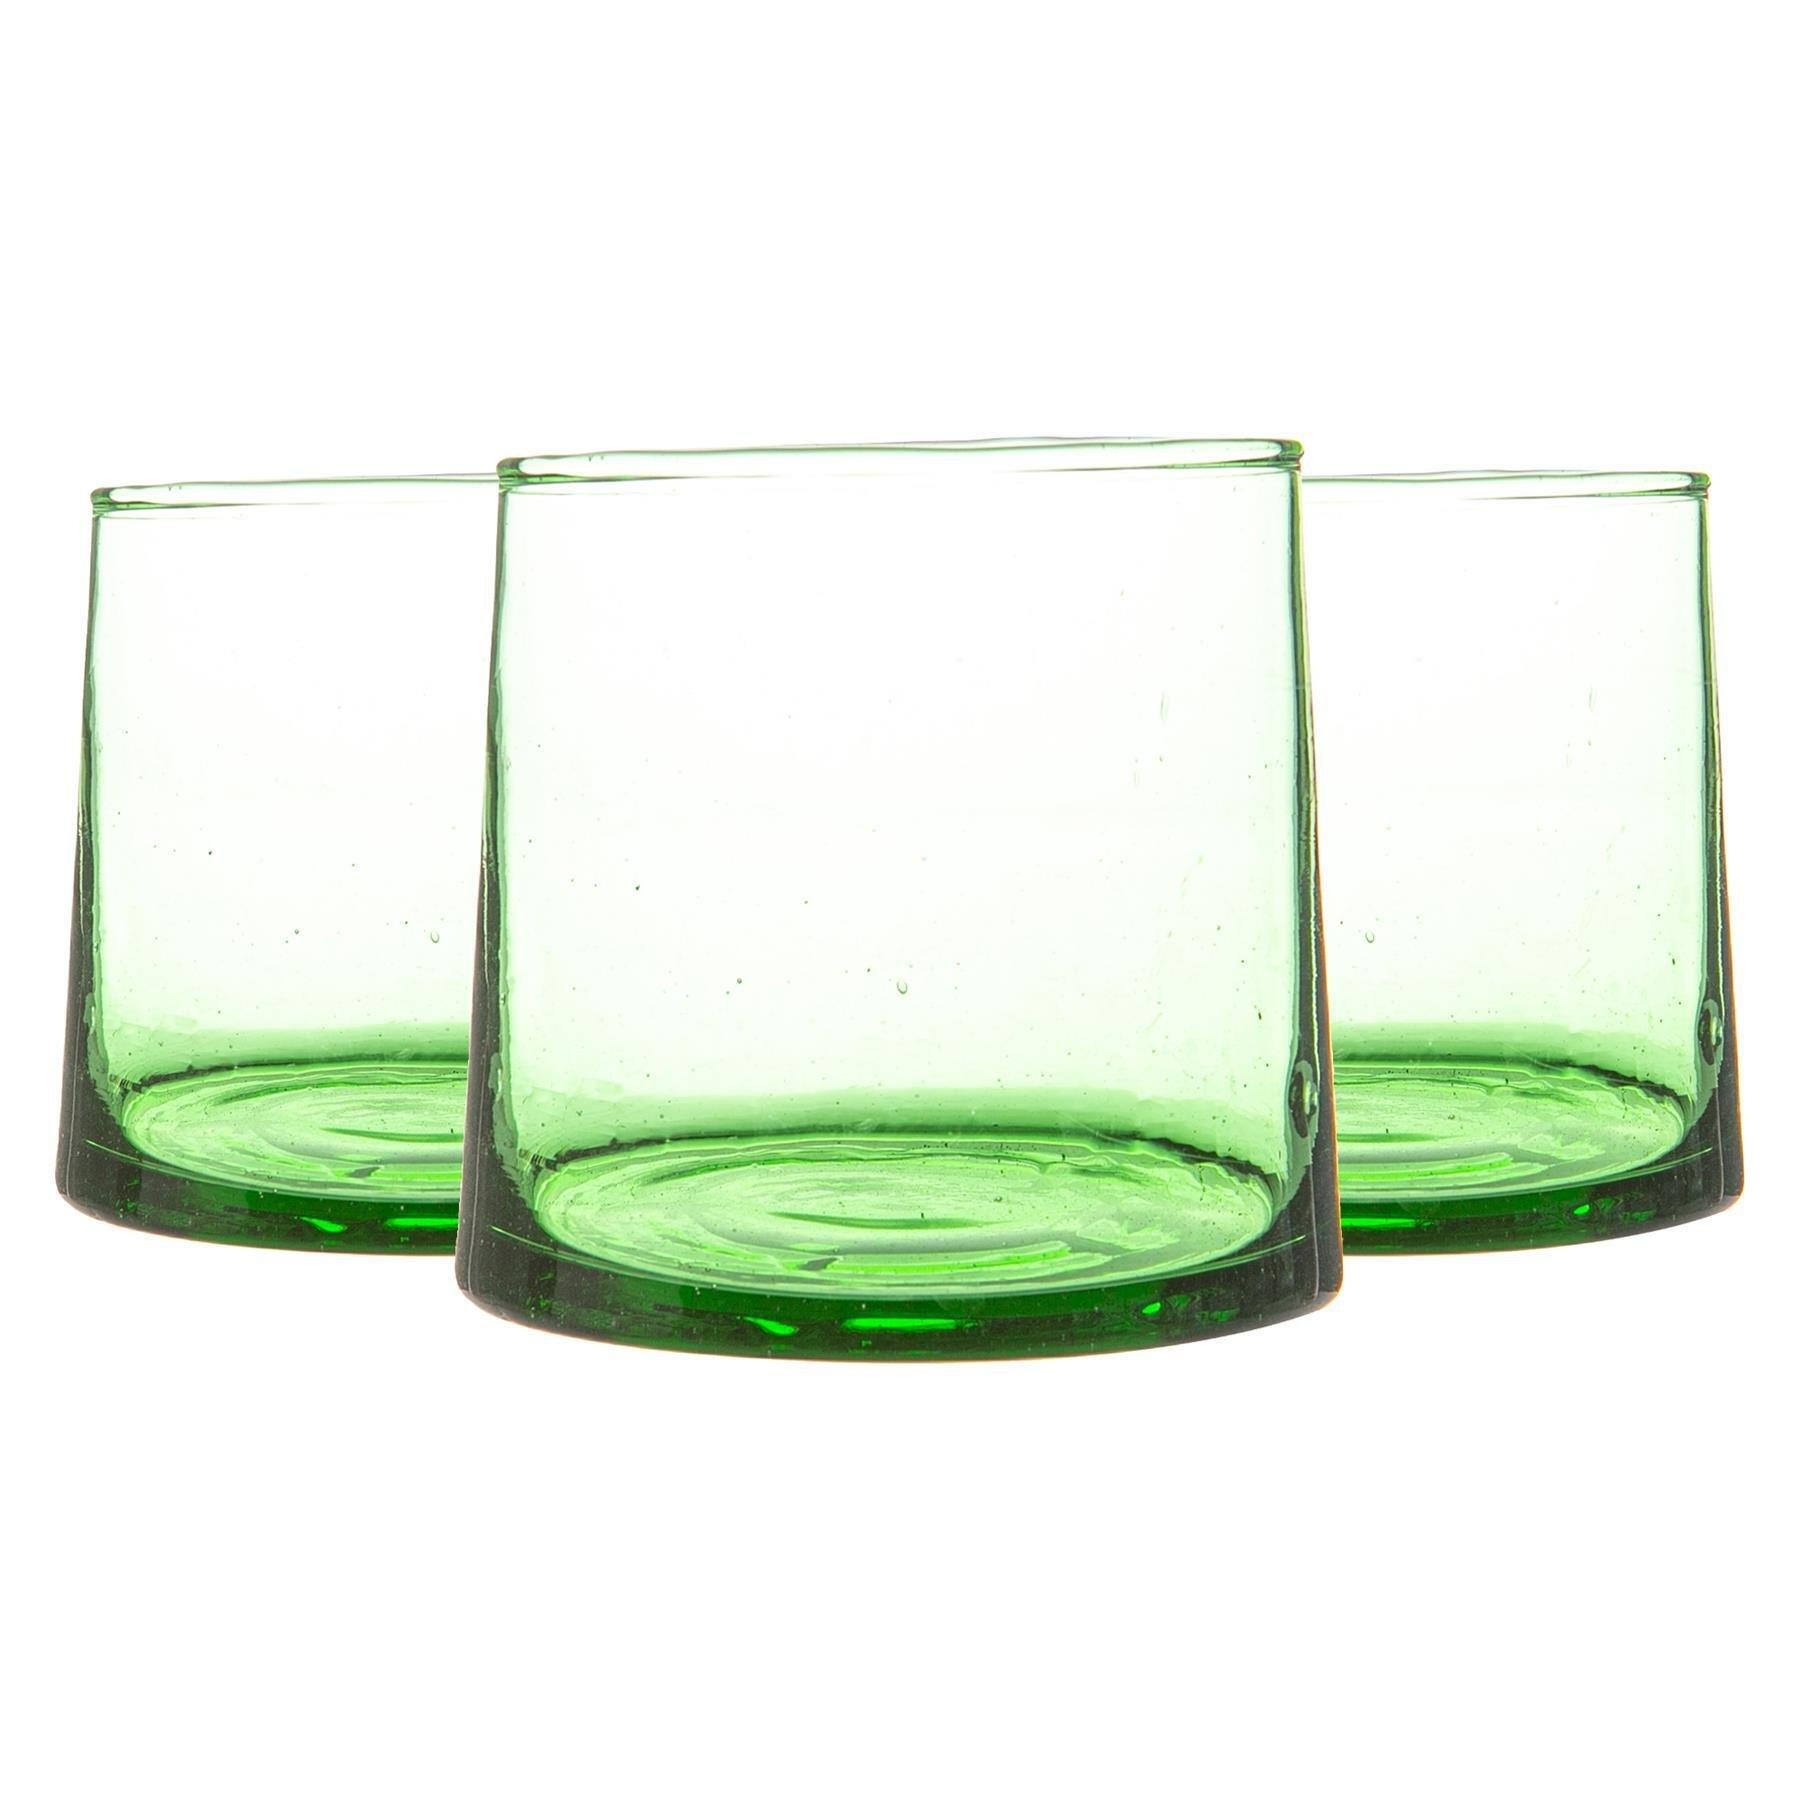 Merzouga Recycled Glass Tealight Holders 7cm Pack of 3 - image 1